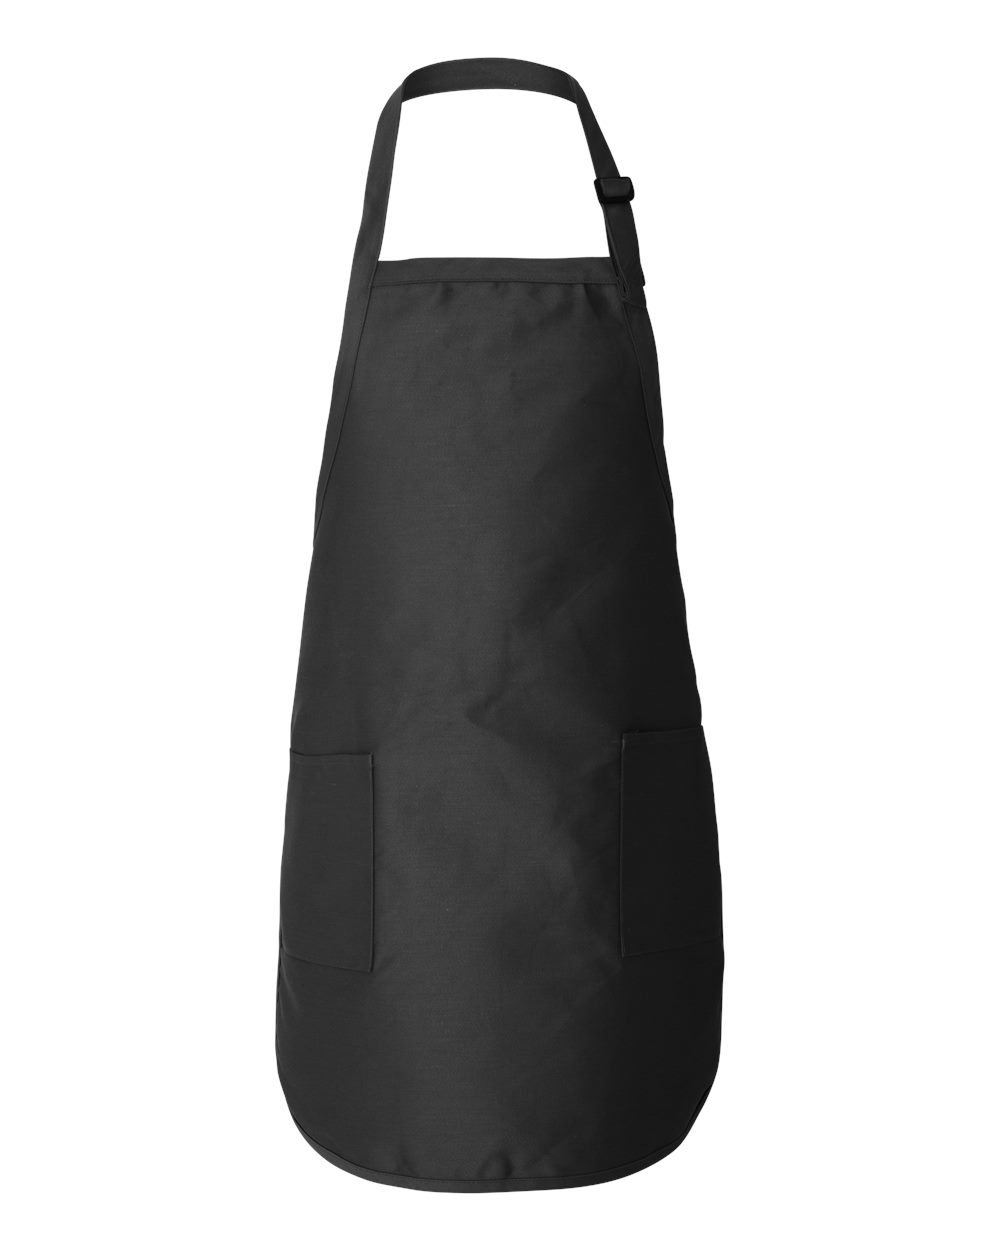 Picture of Q-Tees Full-Length Apron with Pockets